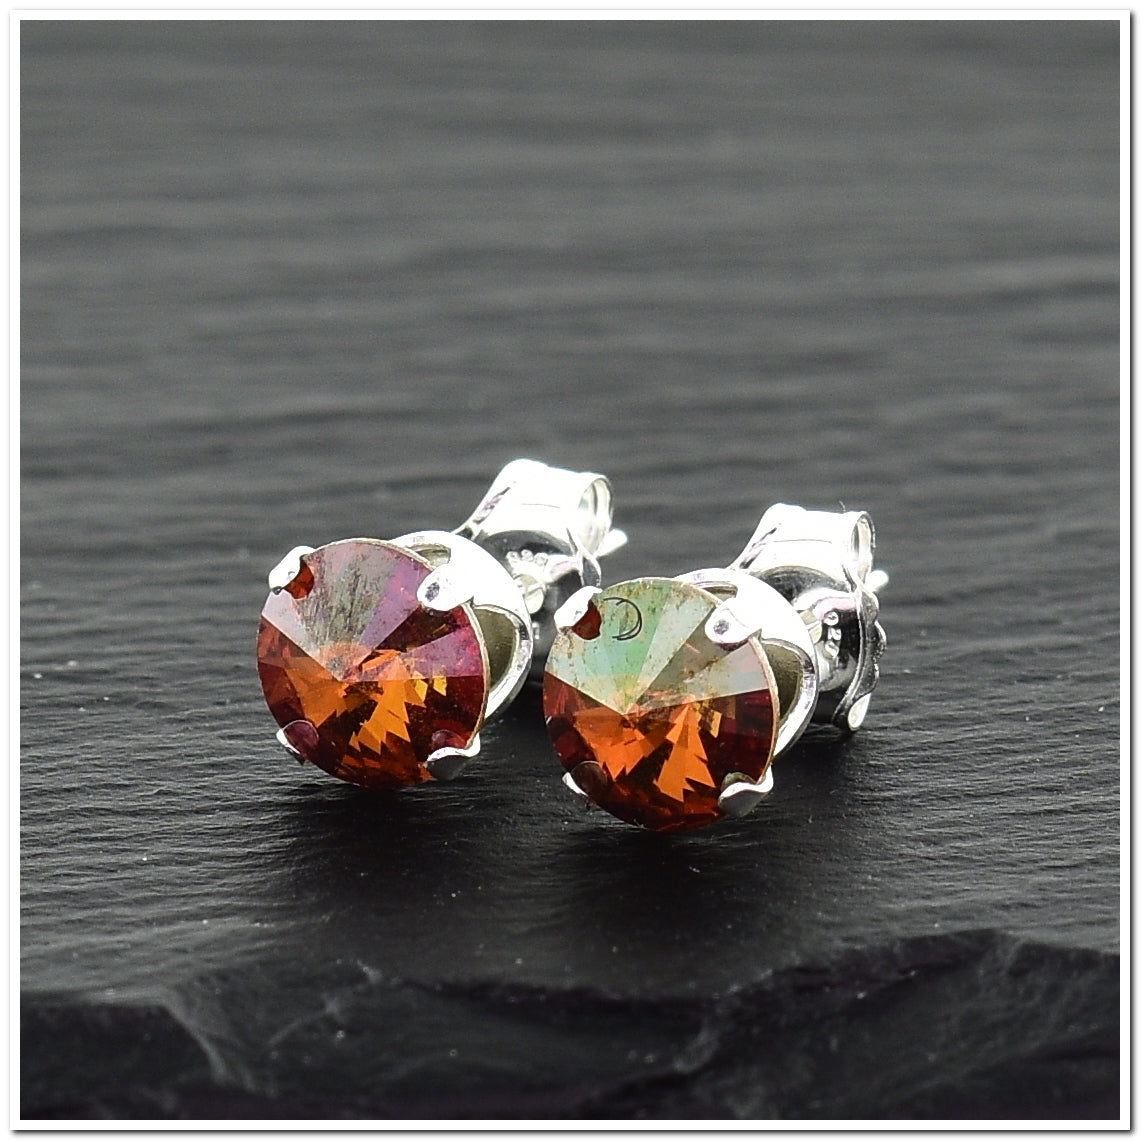 pewterhooter® Women's Classic Collection 925 Sterling silver earrings with sparkling Copper crystals, packaged in a gift box for any occasion.